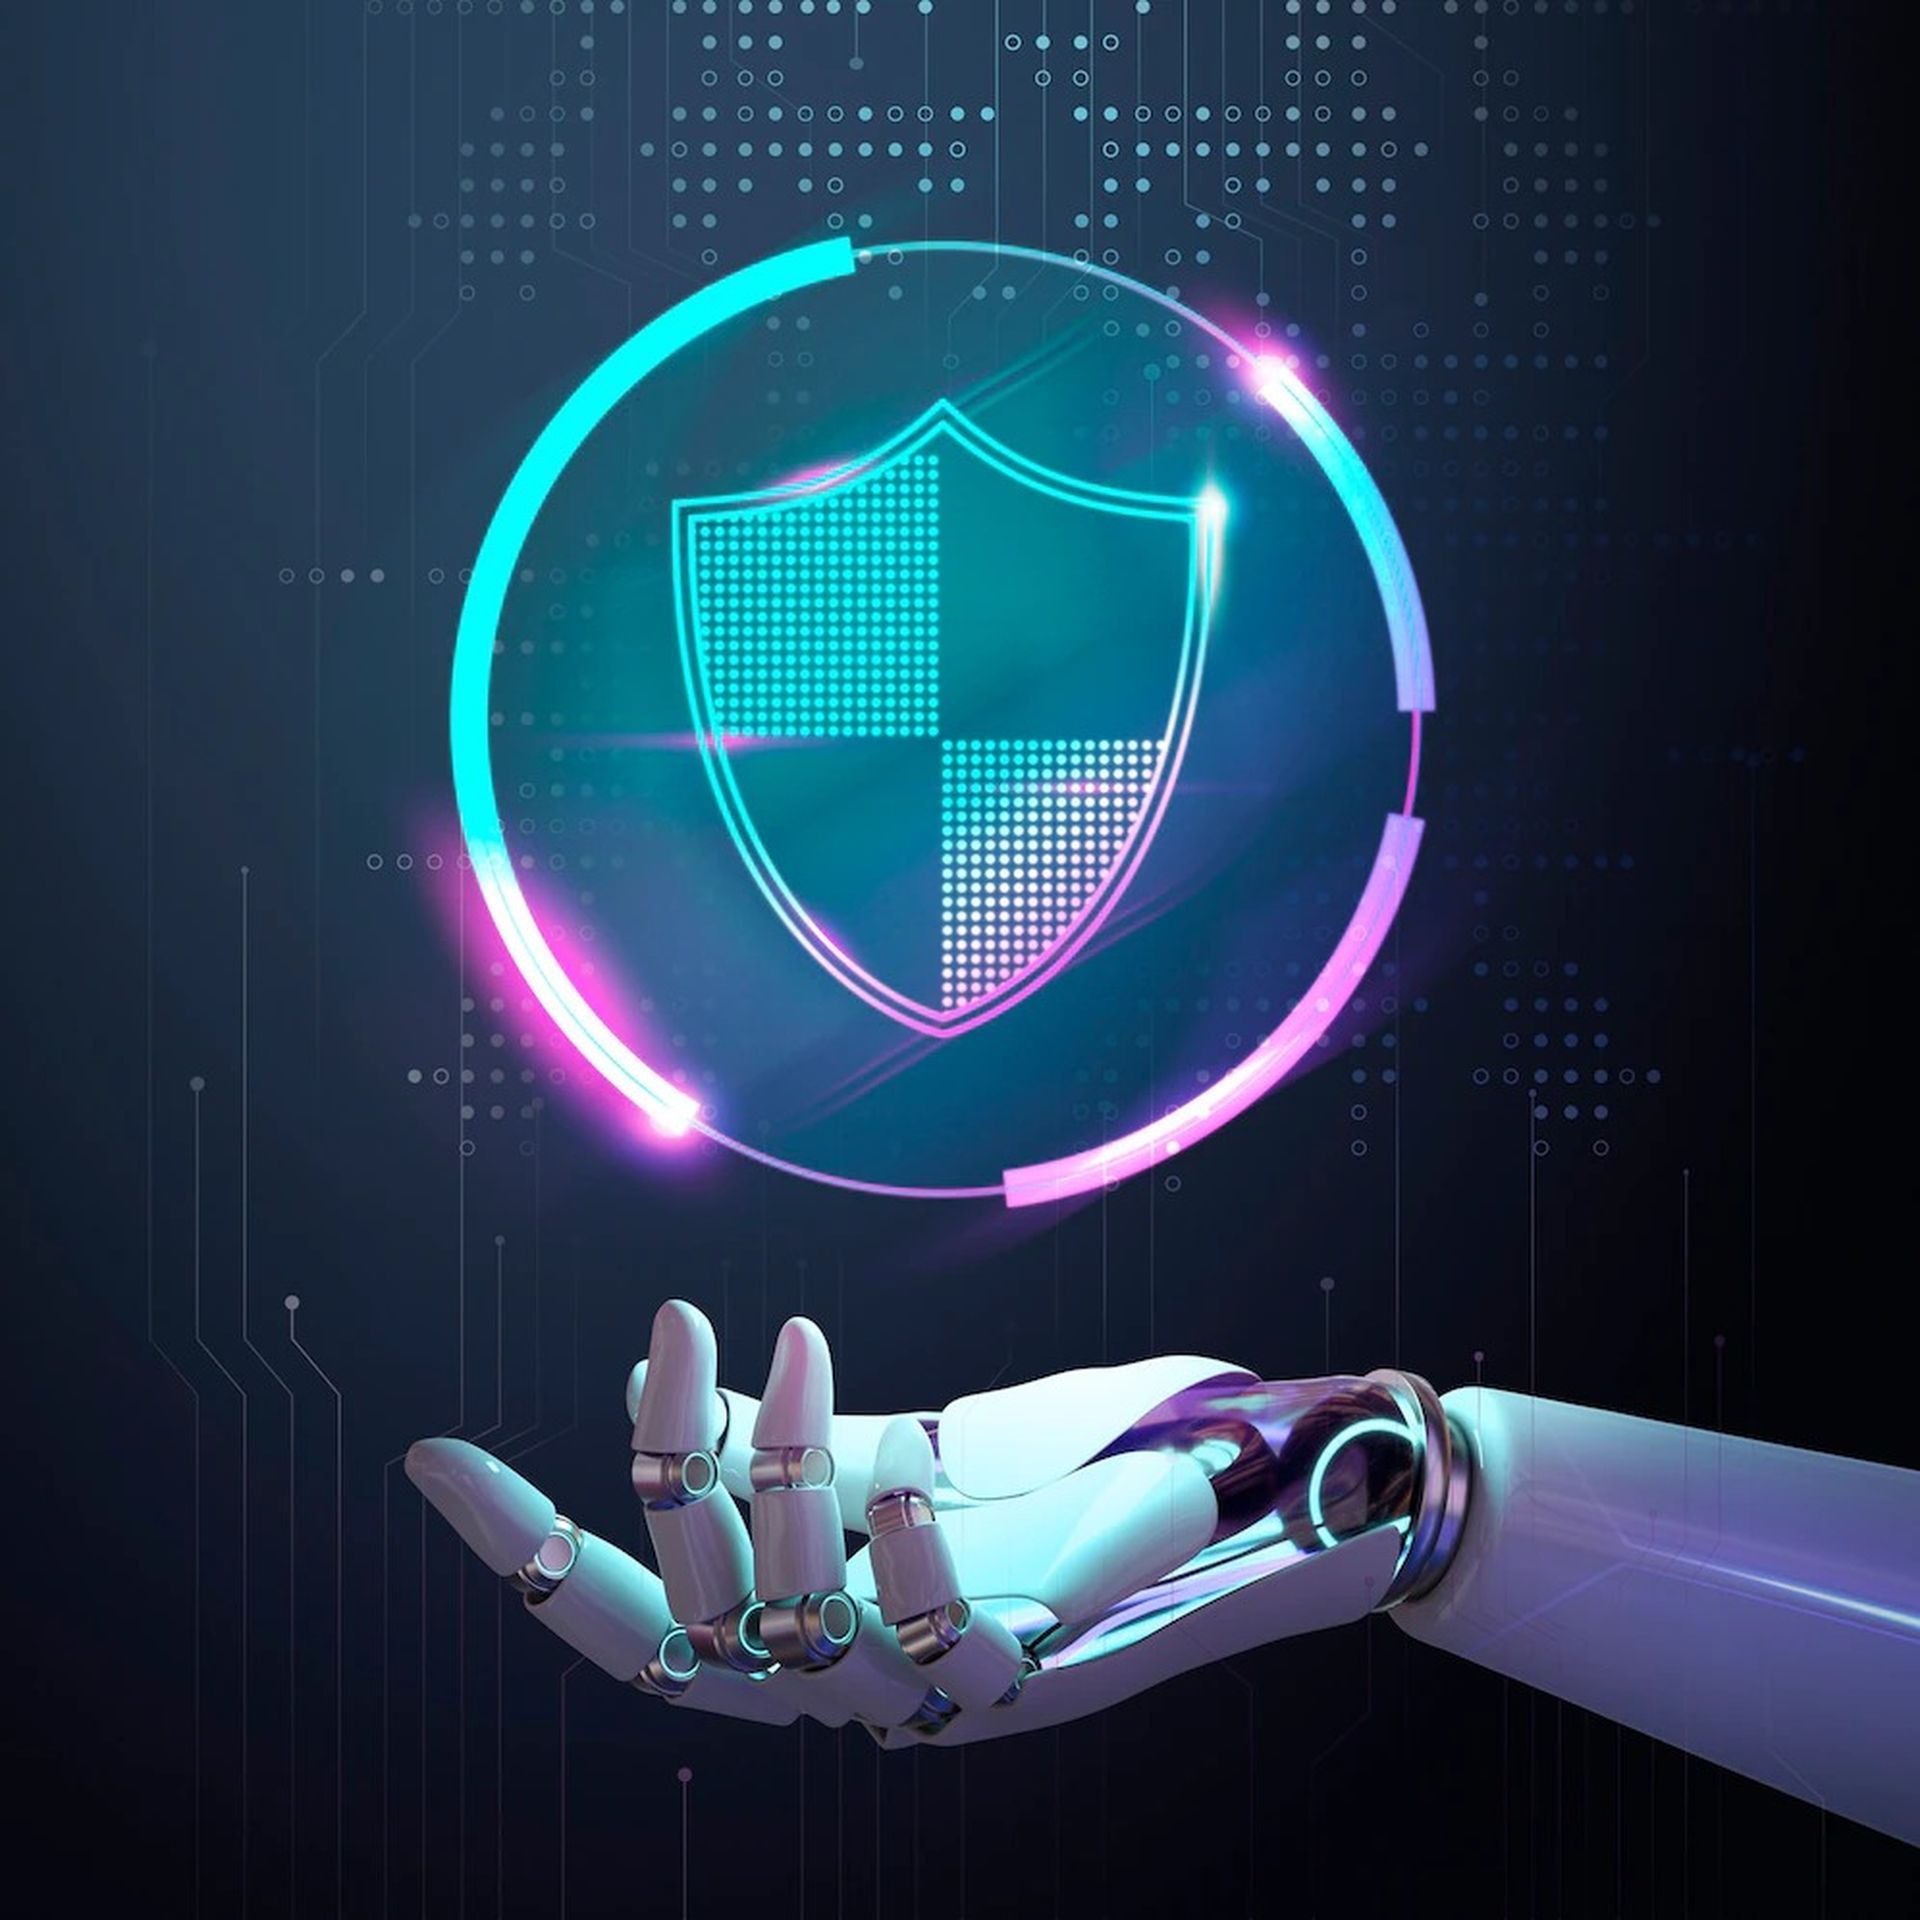 He Era Of Digital Workplace, Enterprises Are Utilizing Cutting-Edge Technologies And Today We Are Going To Discuss How Ai In Security Systems Could Help Businesses Increase Their Cybersecurity.